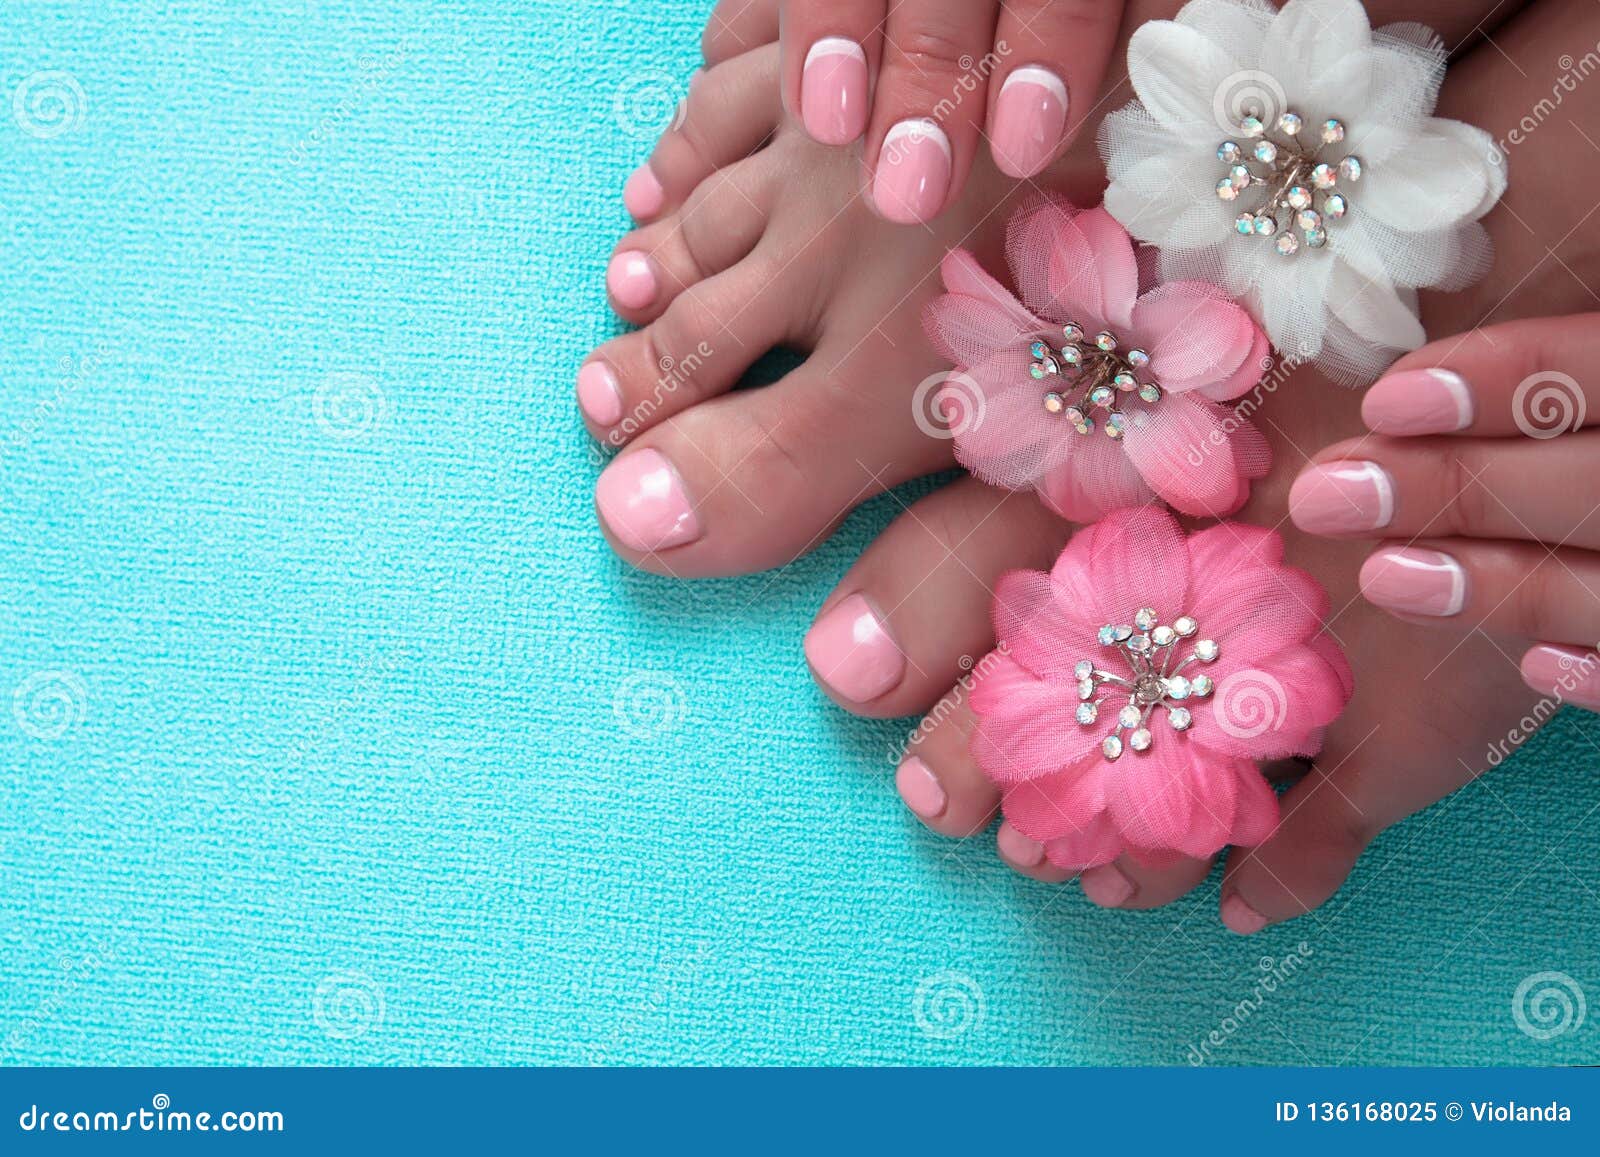 beautiful pink manicure and pedicure with flowers